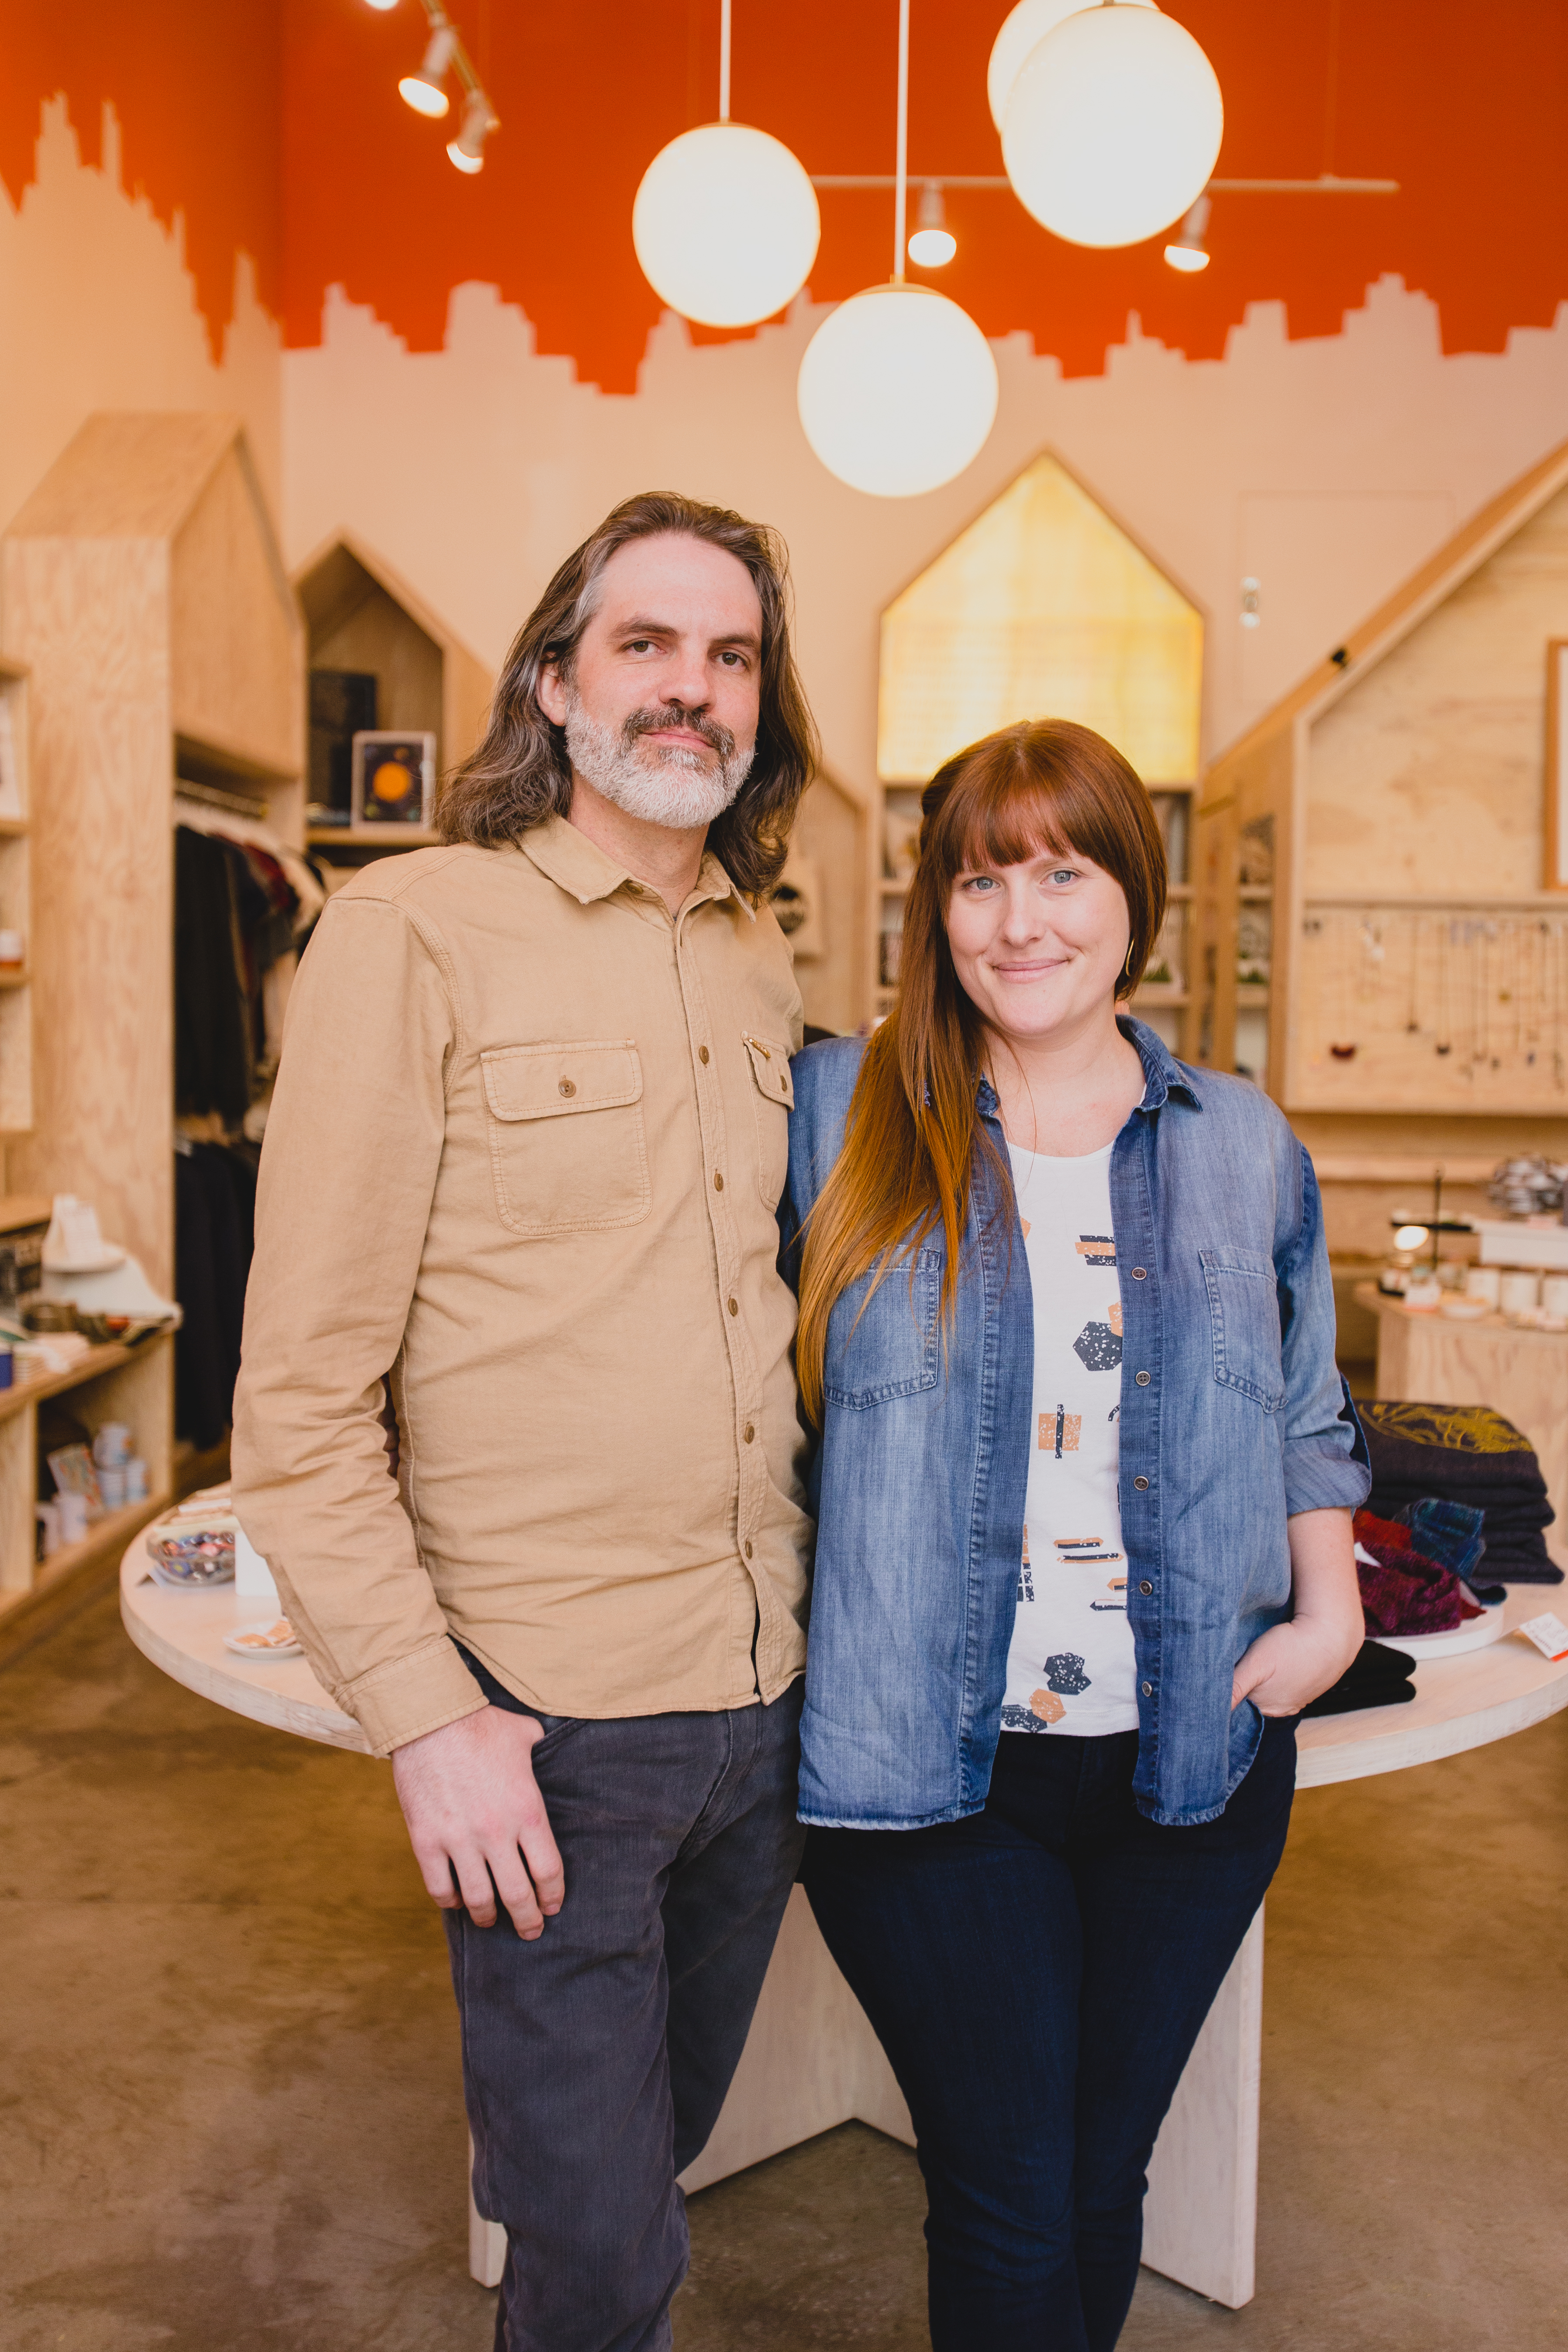 Brianne—chambray top layered over patterned shirt w/dark denim—and husband Jared Mees—tan long-sleeved button up shirt and gray denim, smile for the camera.